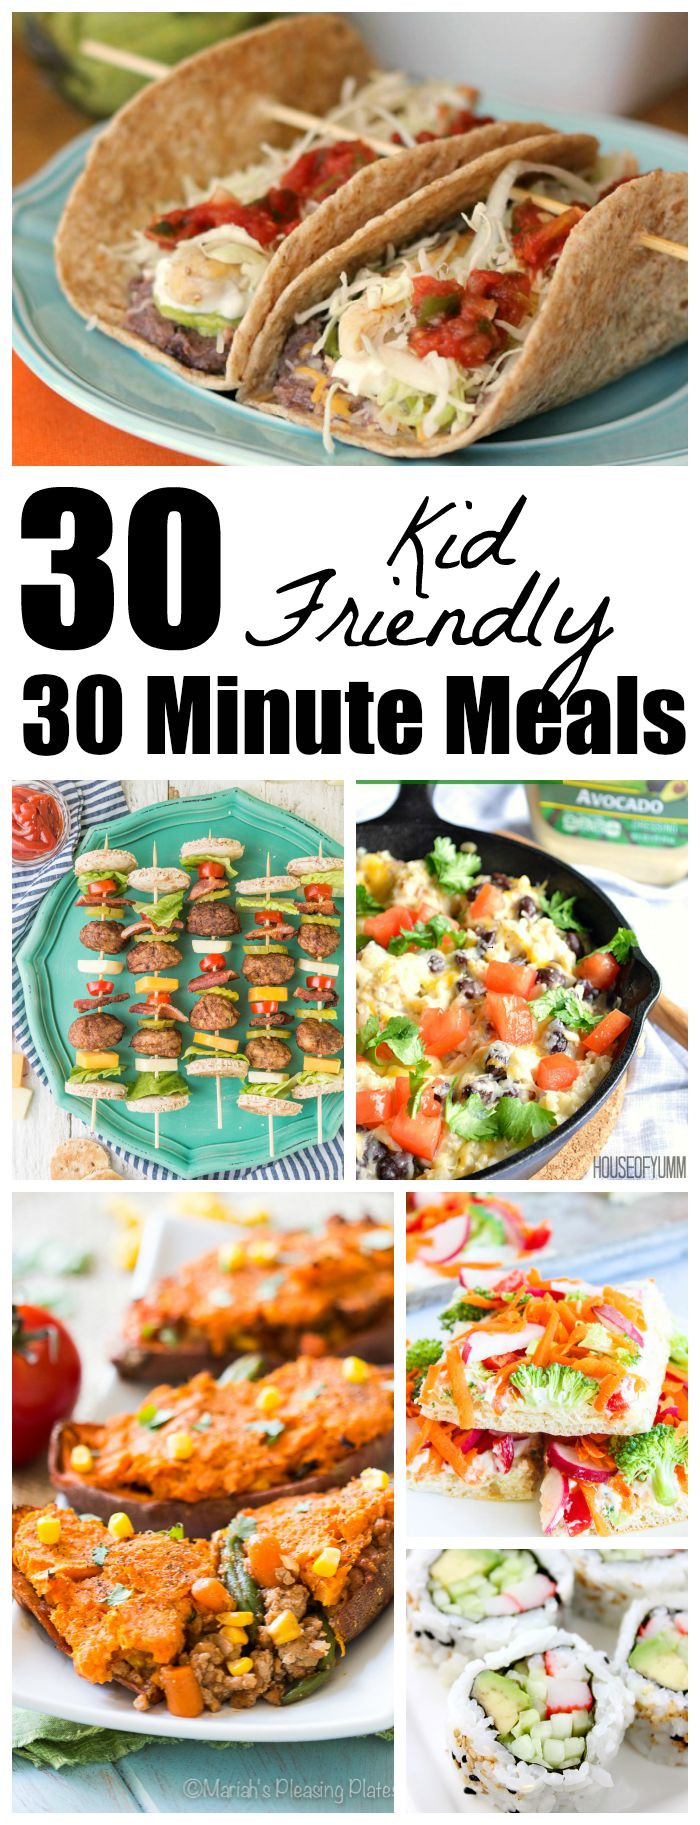 30 Minute Meals for Kids Unique 30 Kid Friendly 30 Minute Meals the Weary Chef